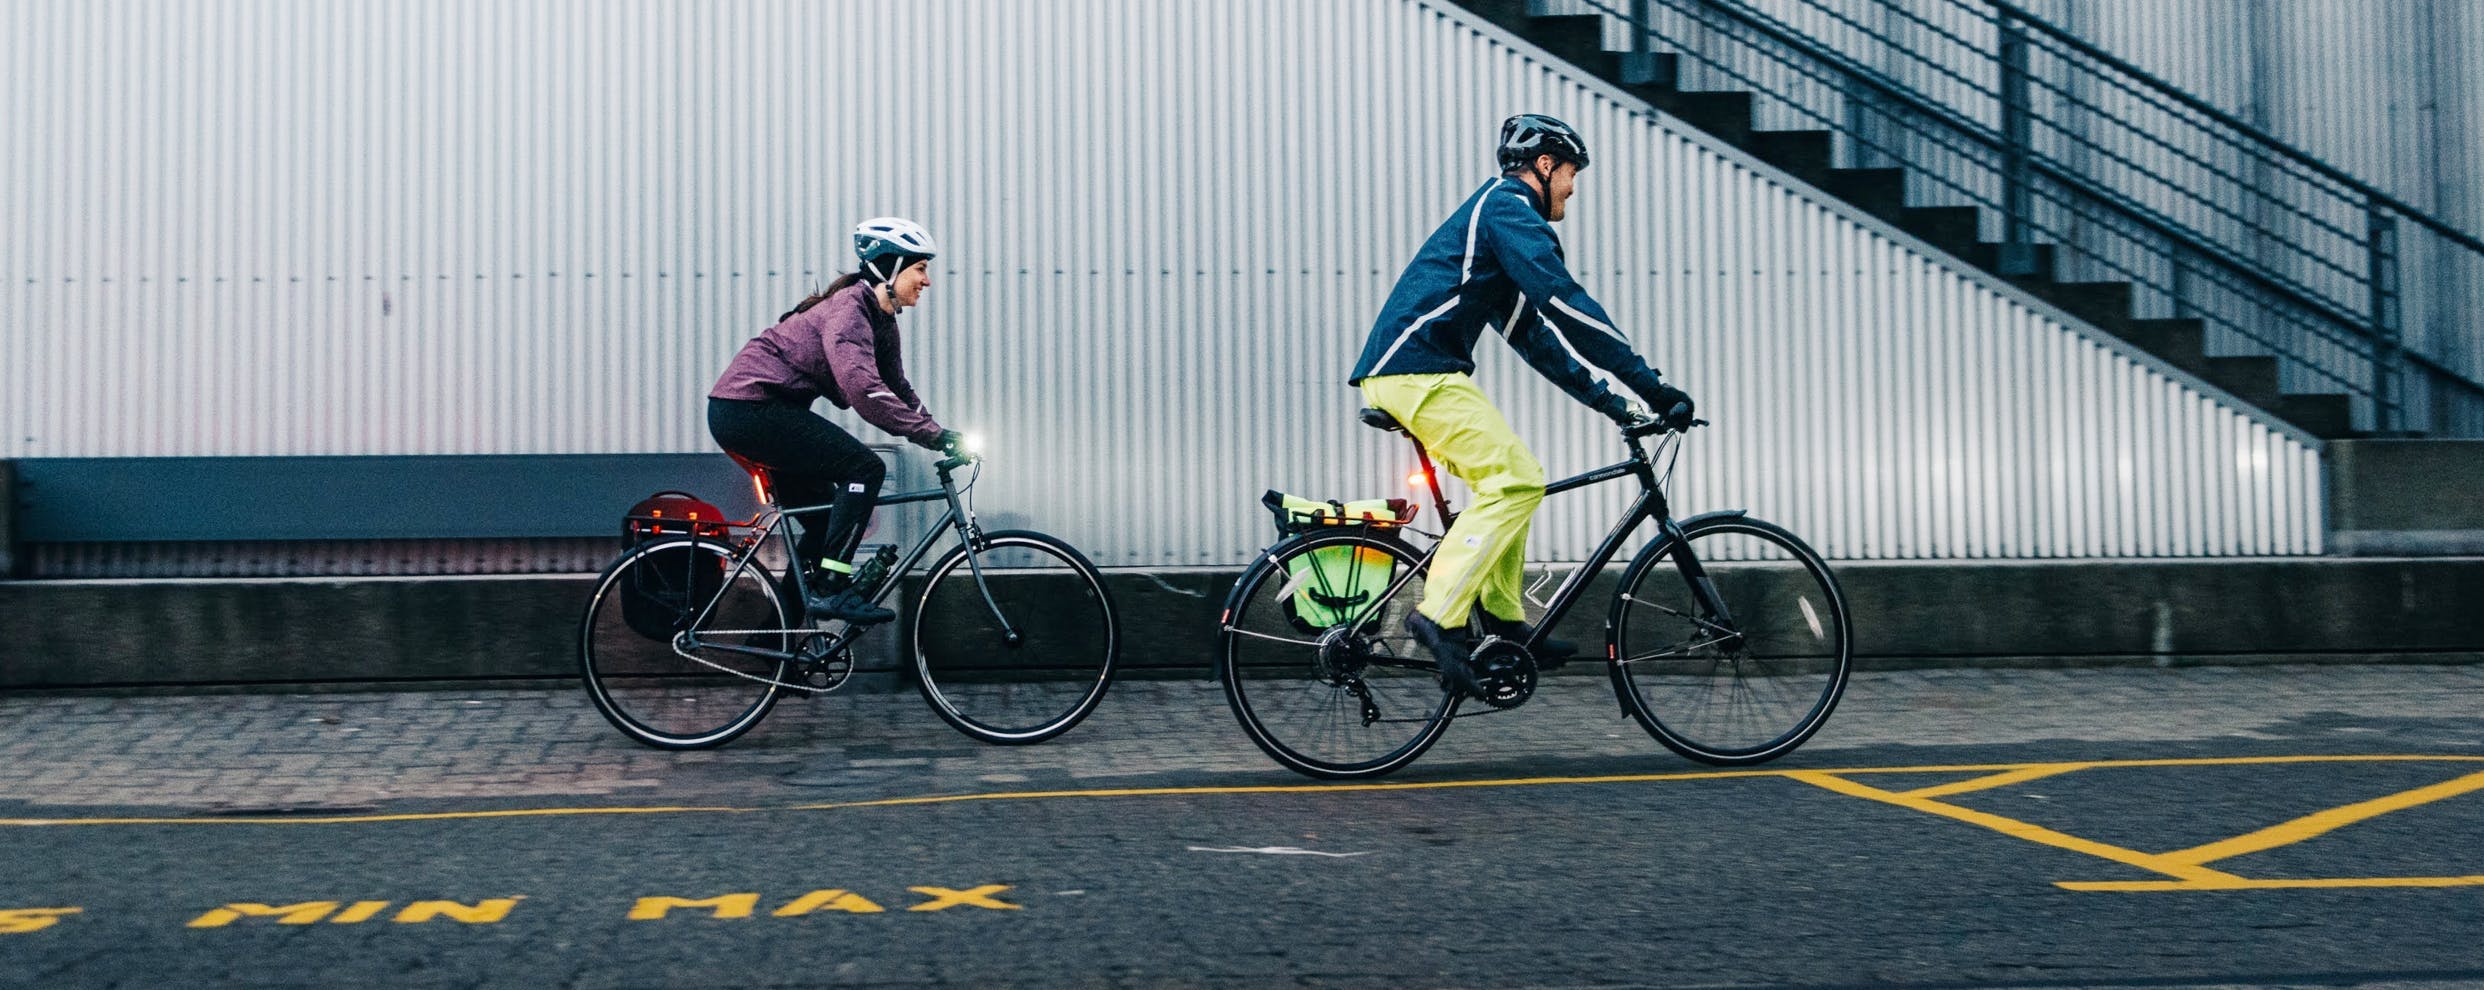 Plus, up to 45% off clothing for your next ride. Sweet deals for two wheels.